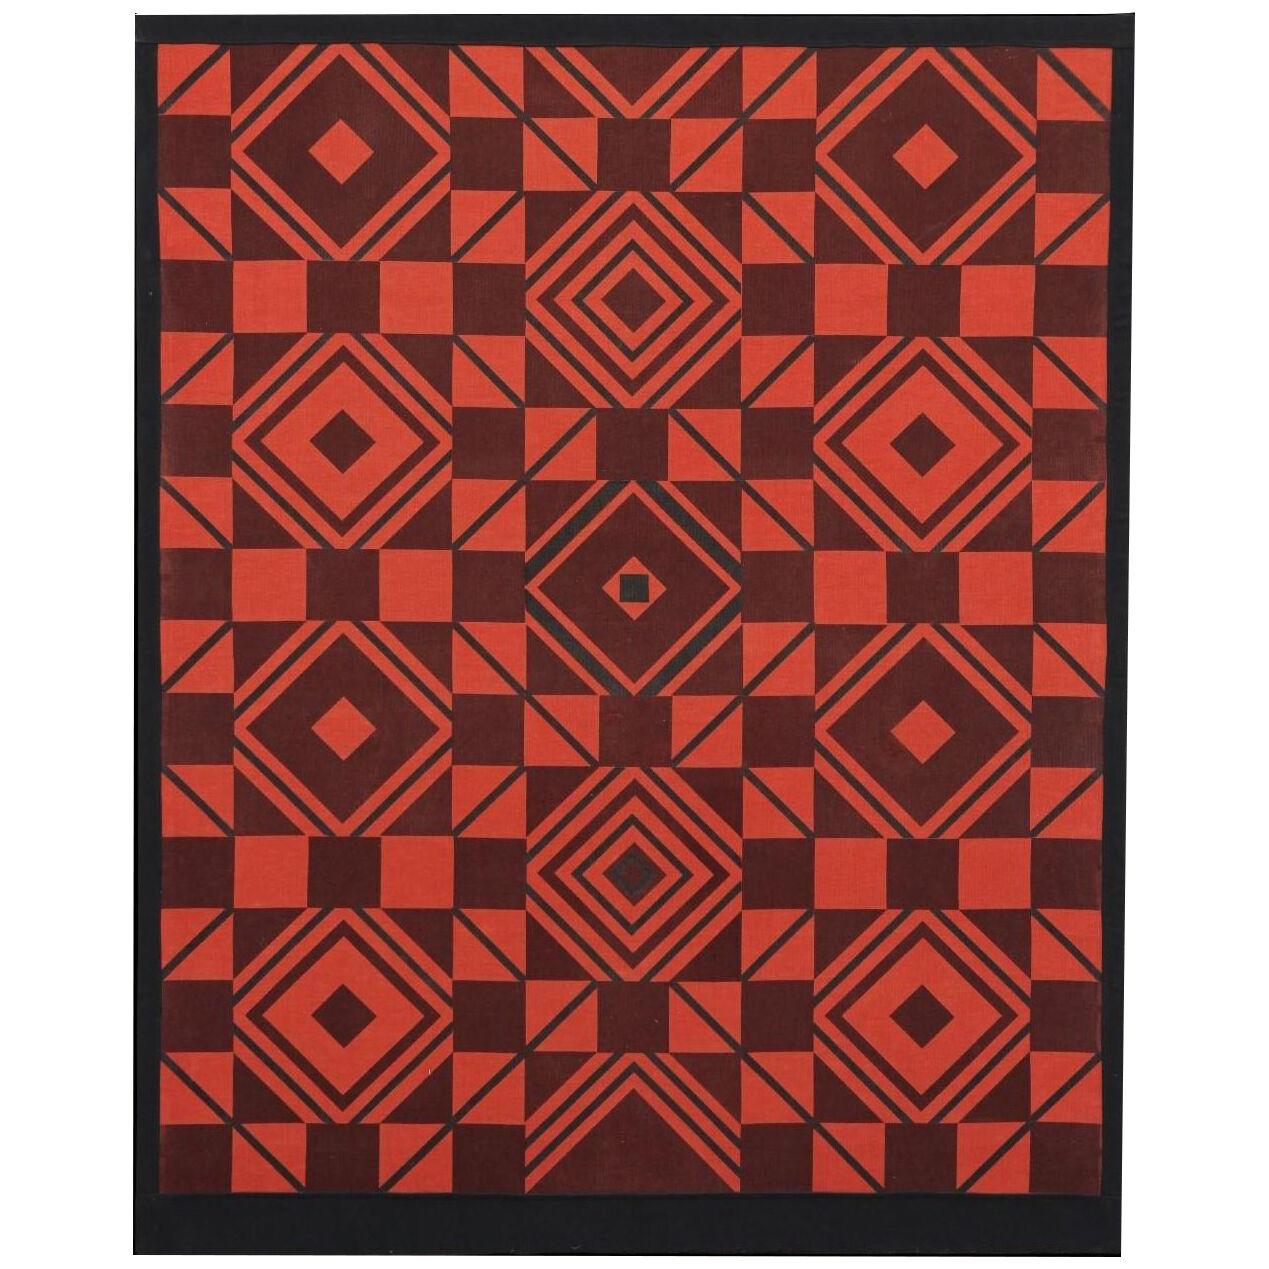 Stella Sullivan "Built on a Square" Geometric Stretched Tapestry 1970s